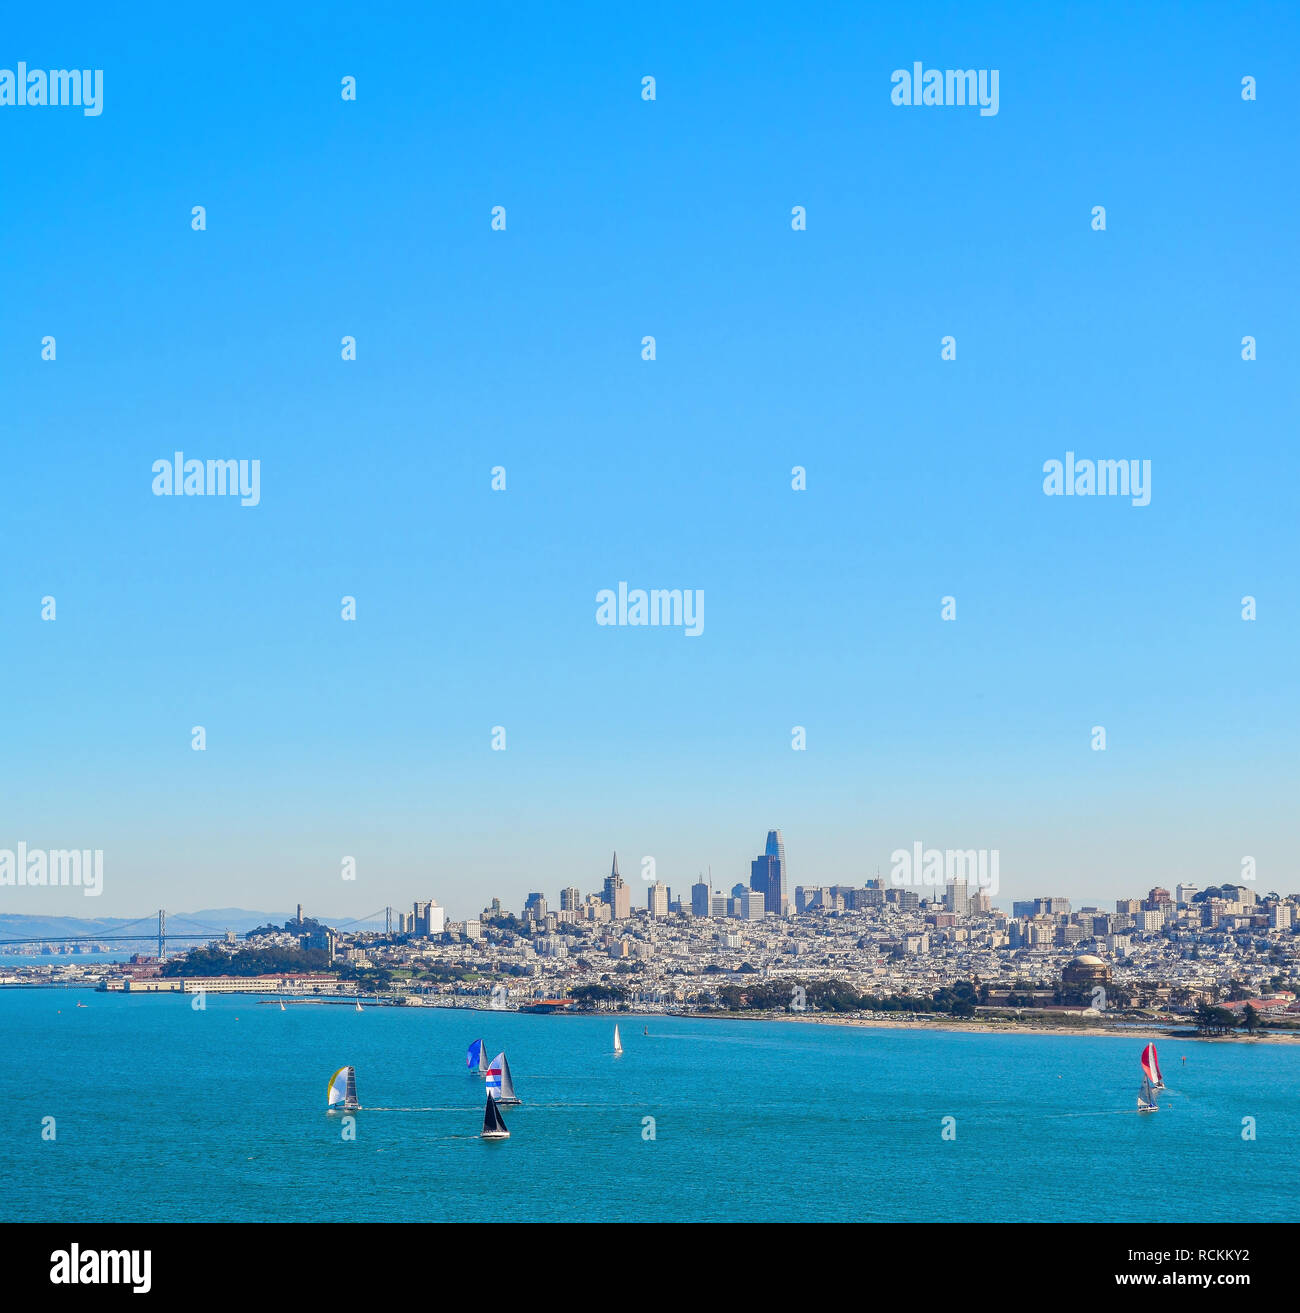 Sea bay, view of the city of San Francisco from the sea. Ships in the sea bay Stock Photo